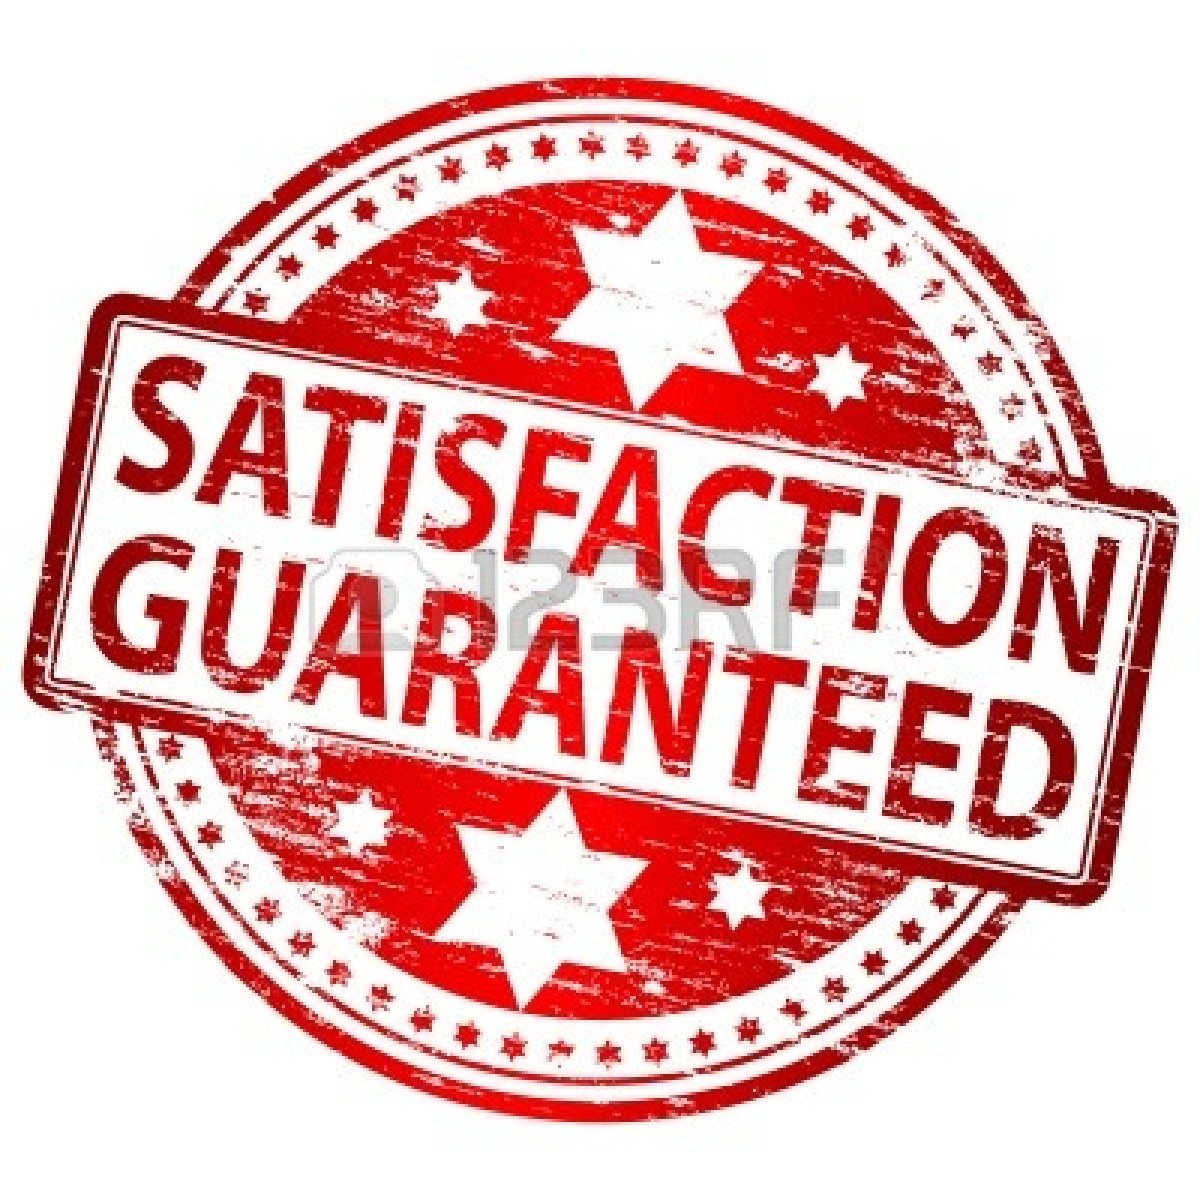 8986328 satisfaction guaranteed rubber stamp 2ae1378c 1818 4403 abf8 6809c65be831